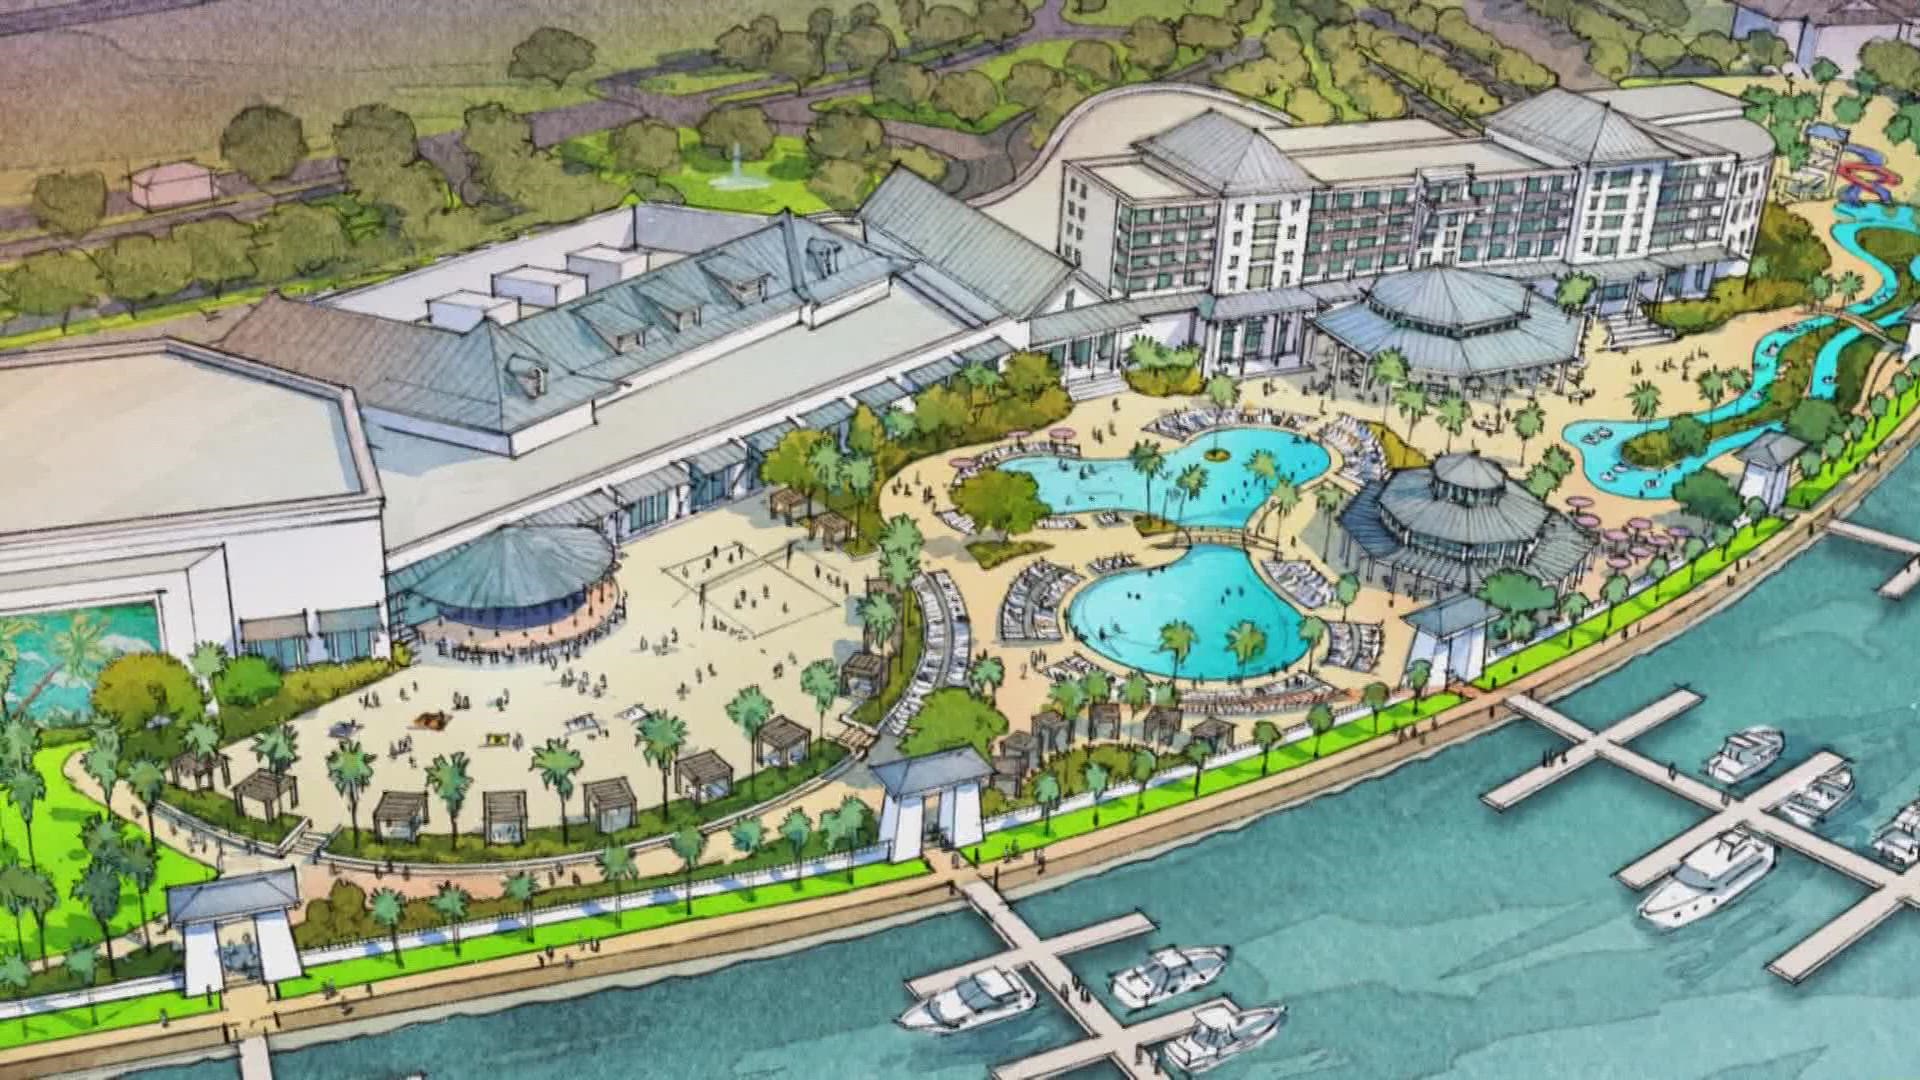 Saint Tammany Corporation hired Convergence Strategy Group to find out how Camellia Bay Resort and Casino would impact the area